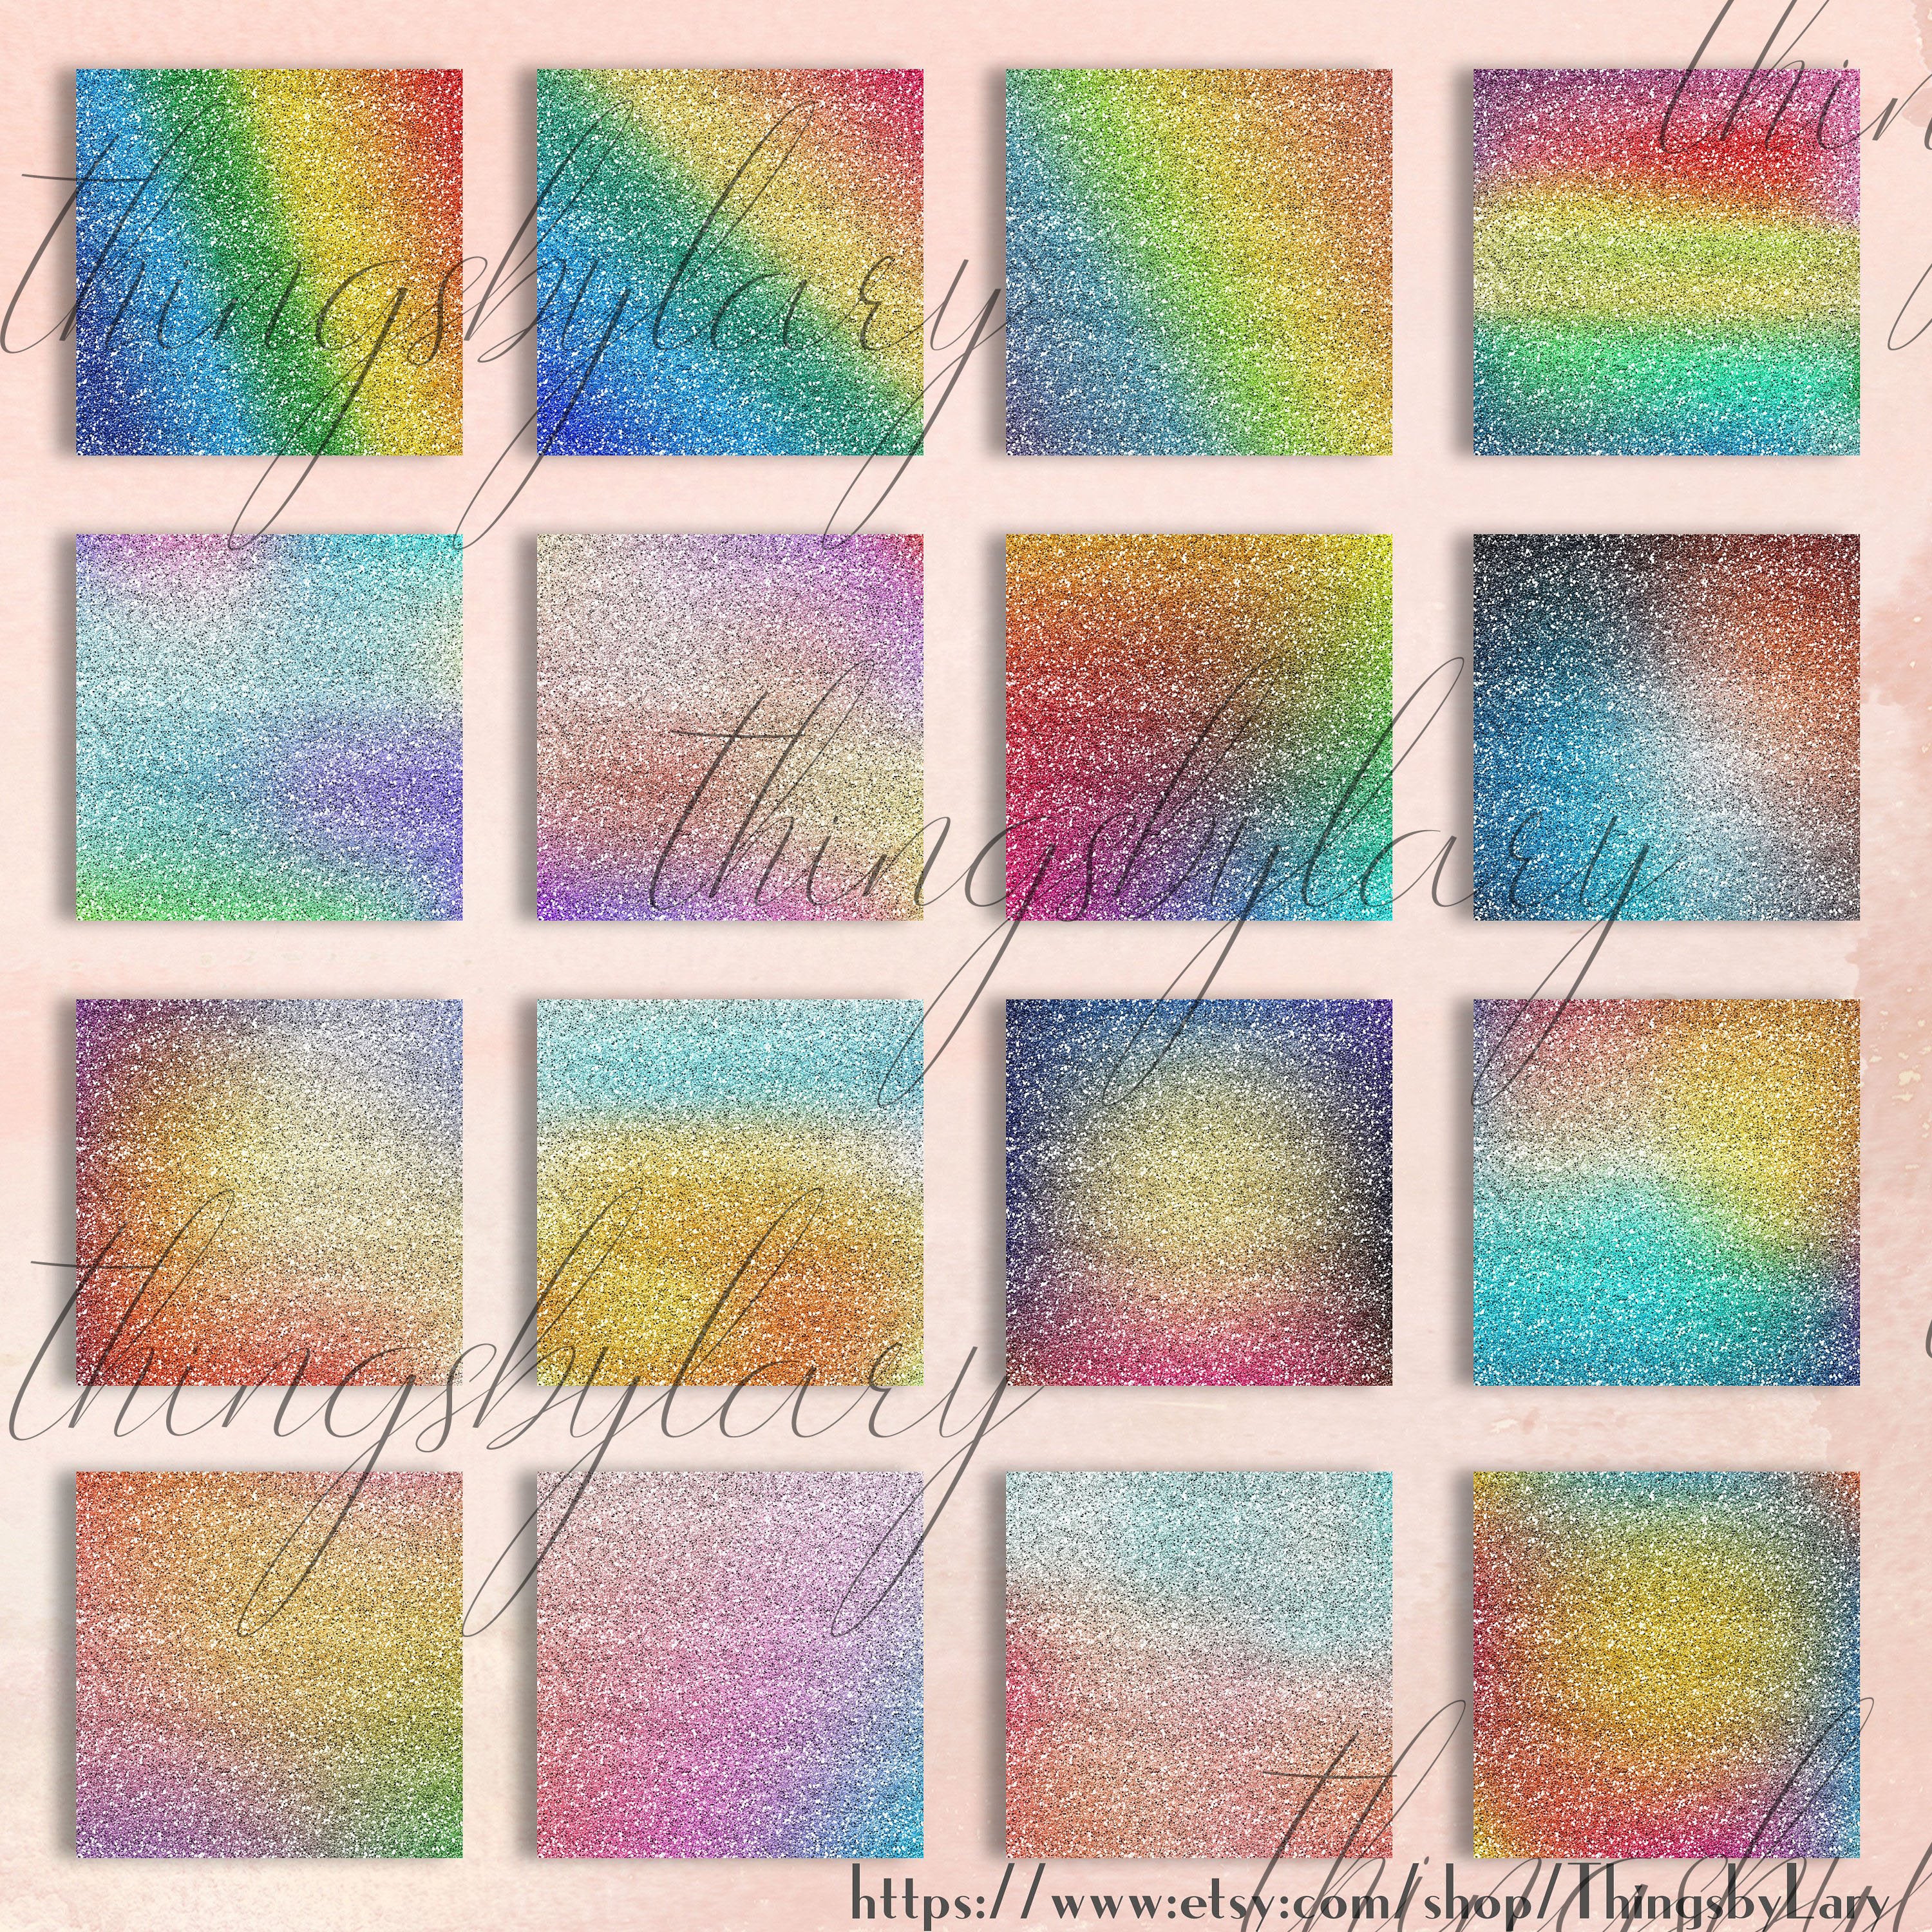 16 Glitter Rainbow Papers, 12 inch, 300 Dpi, Instant Download, Commercial Use Papers, JPG Paper, Glitter Paper, Digital Paper Pack, Rainbow